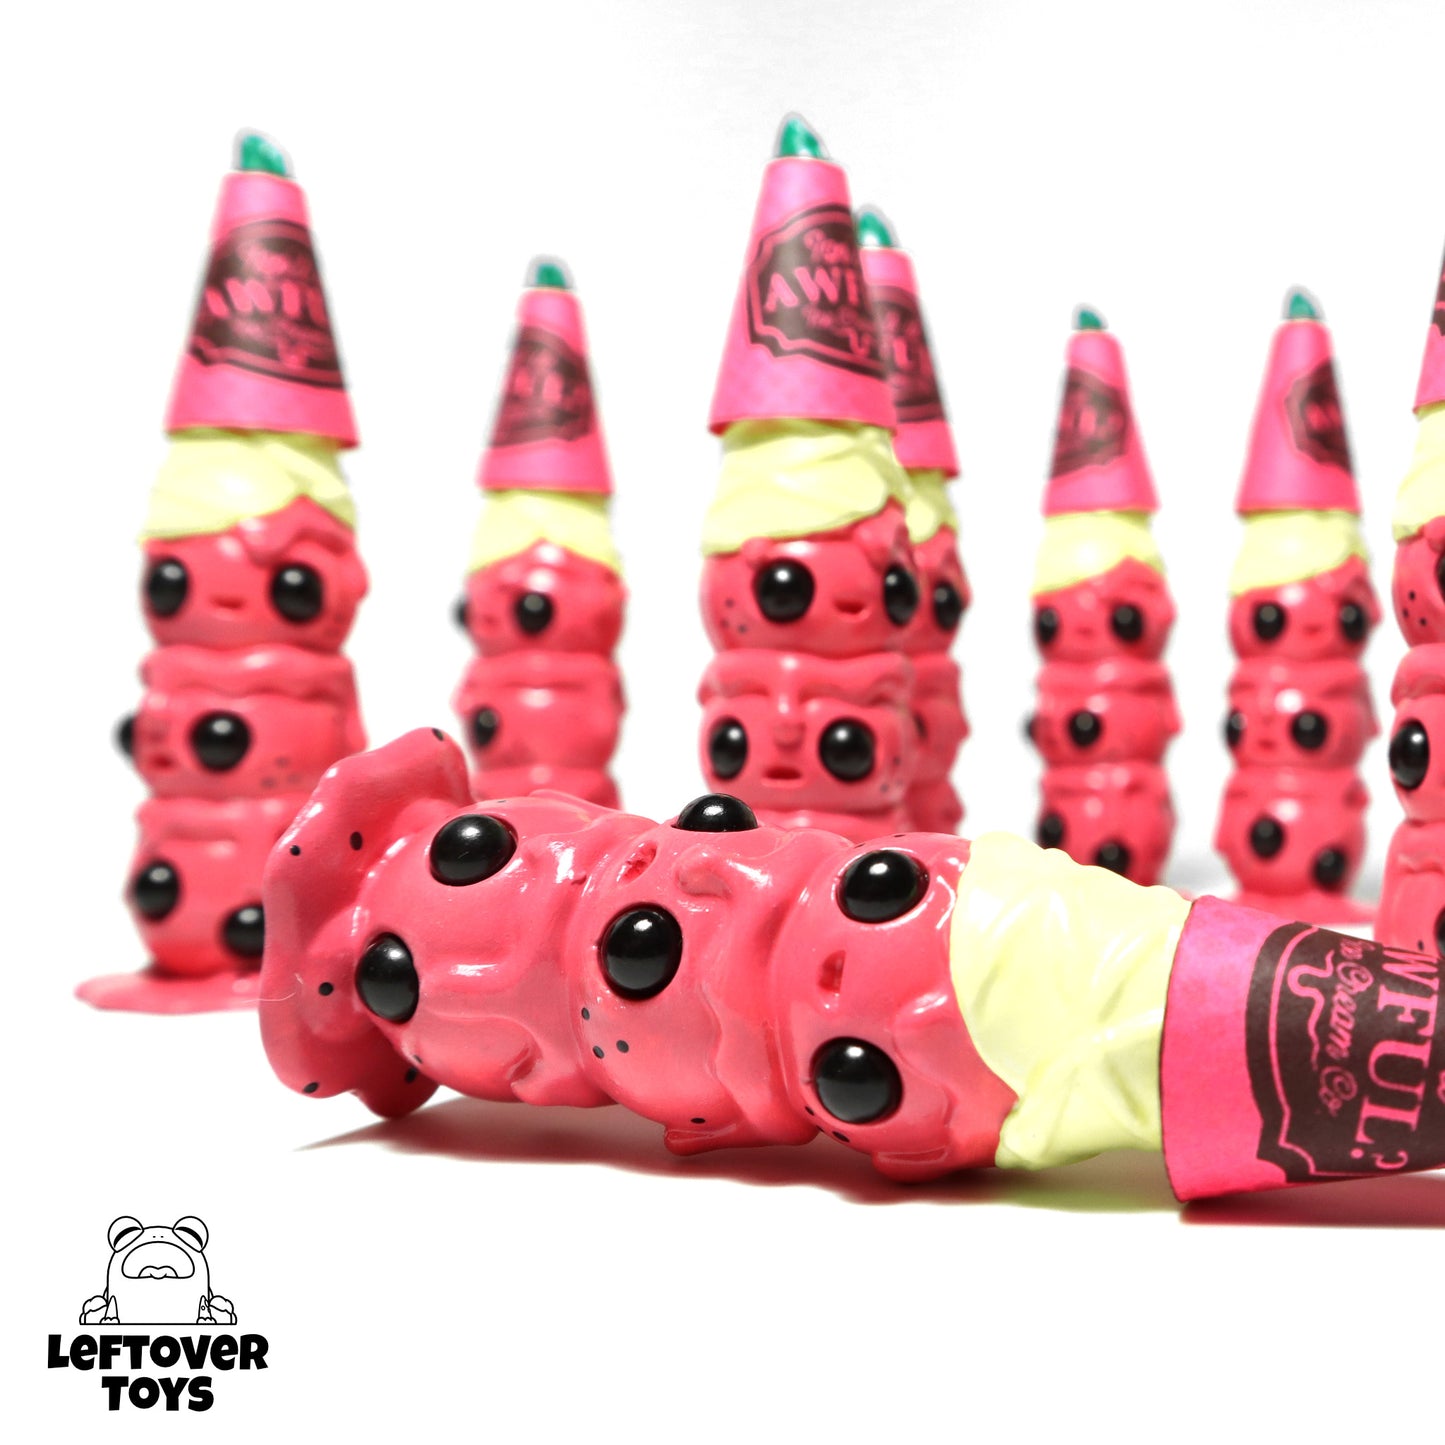 This is Wafull Wafullmelon Limited Edition Hand-Painted Resin Figure